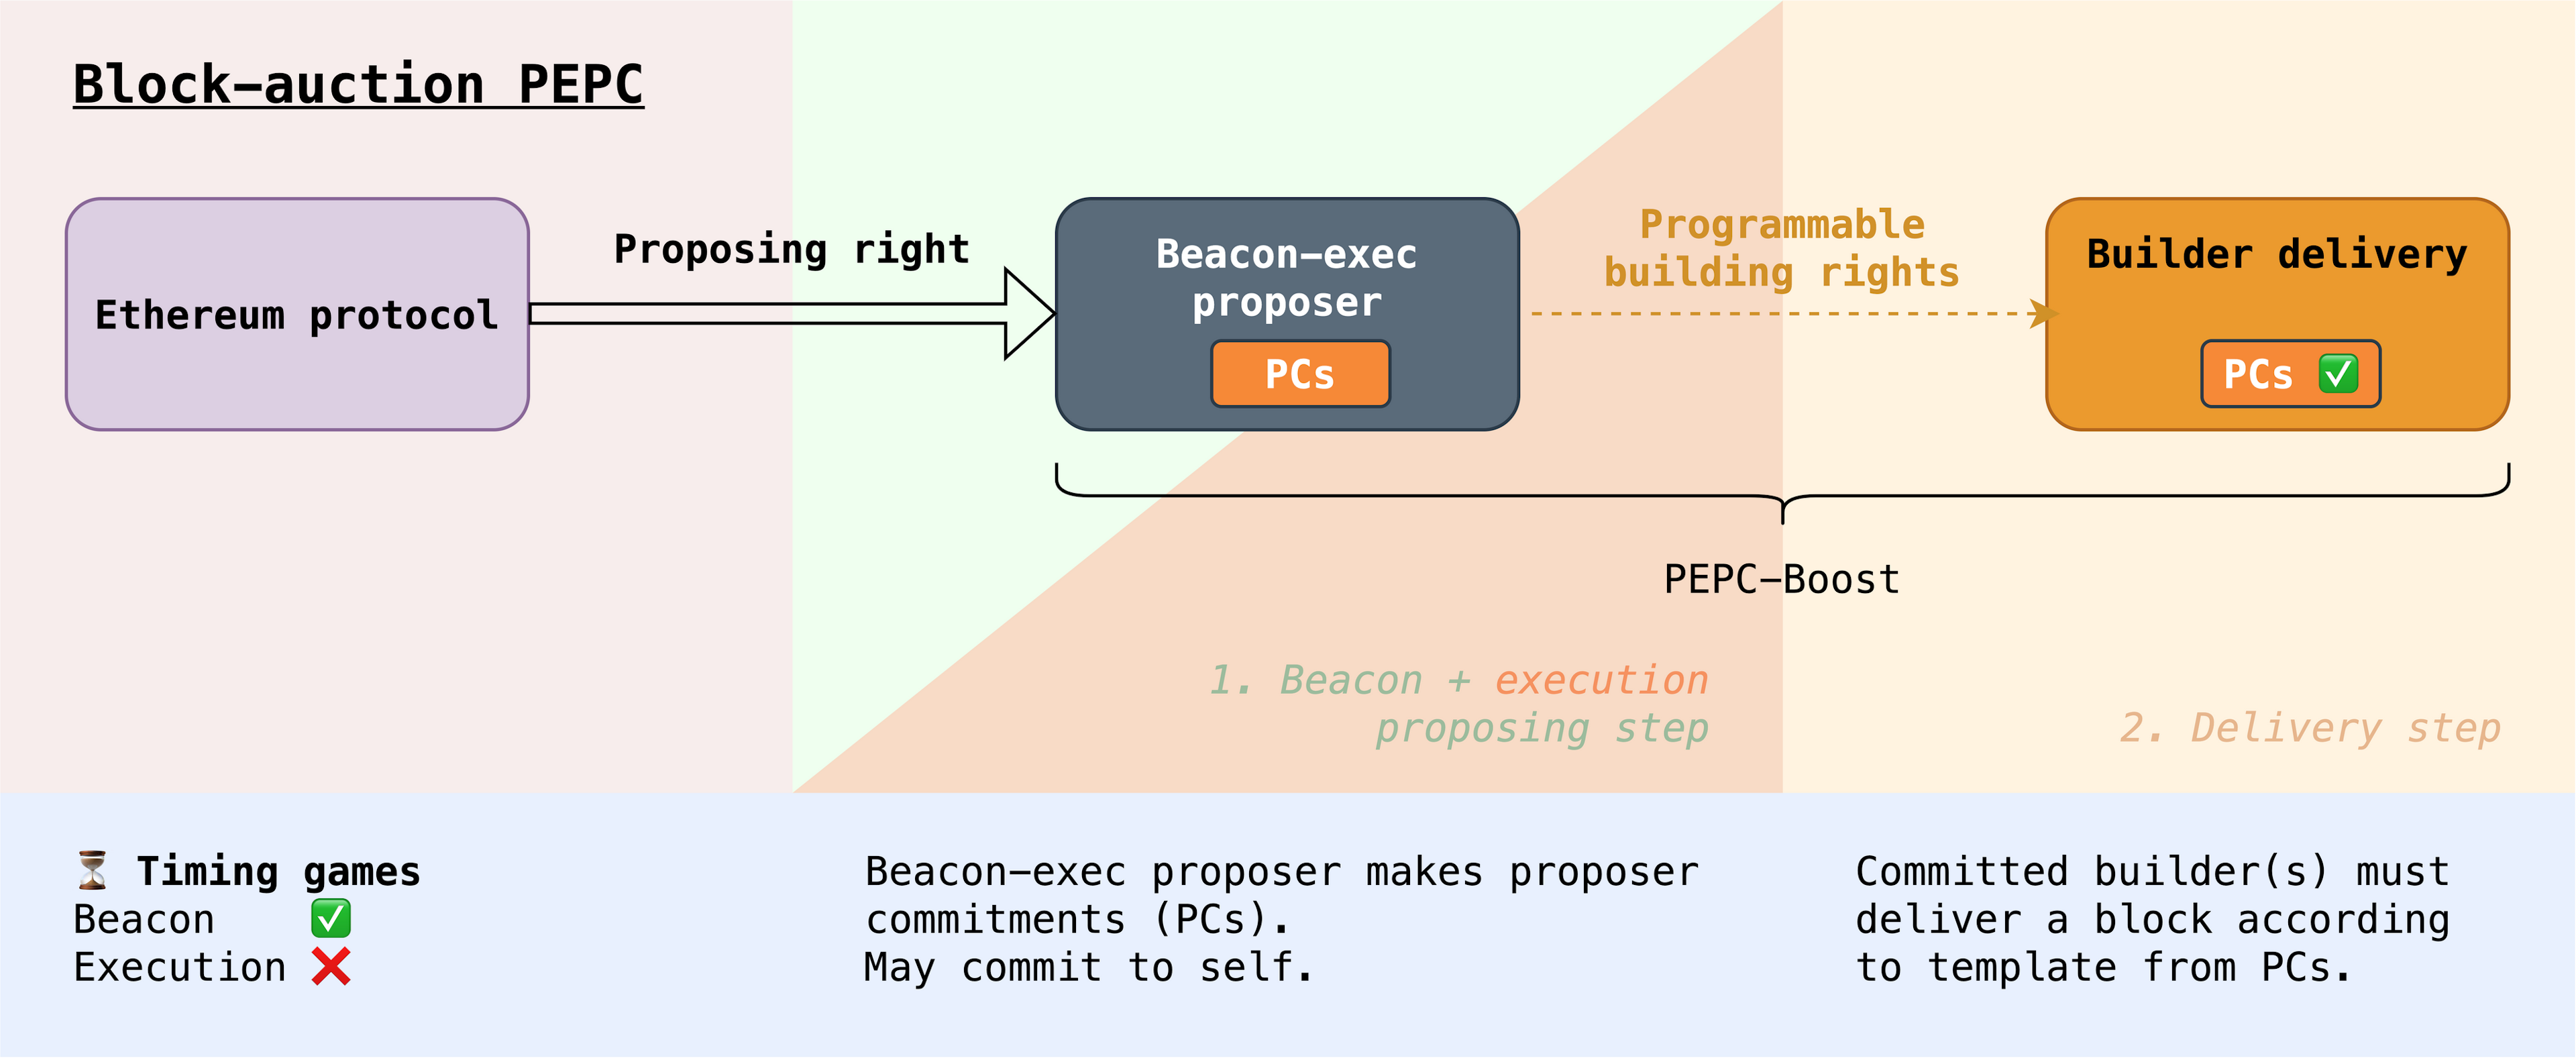 Note that PEPC is also bypassable with PEPC-Boost, as beacon-exec proposers could commit to a trivial commitment and trust that the relay enforces proposer commitments communicated by the proposer to the relay off-chain.